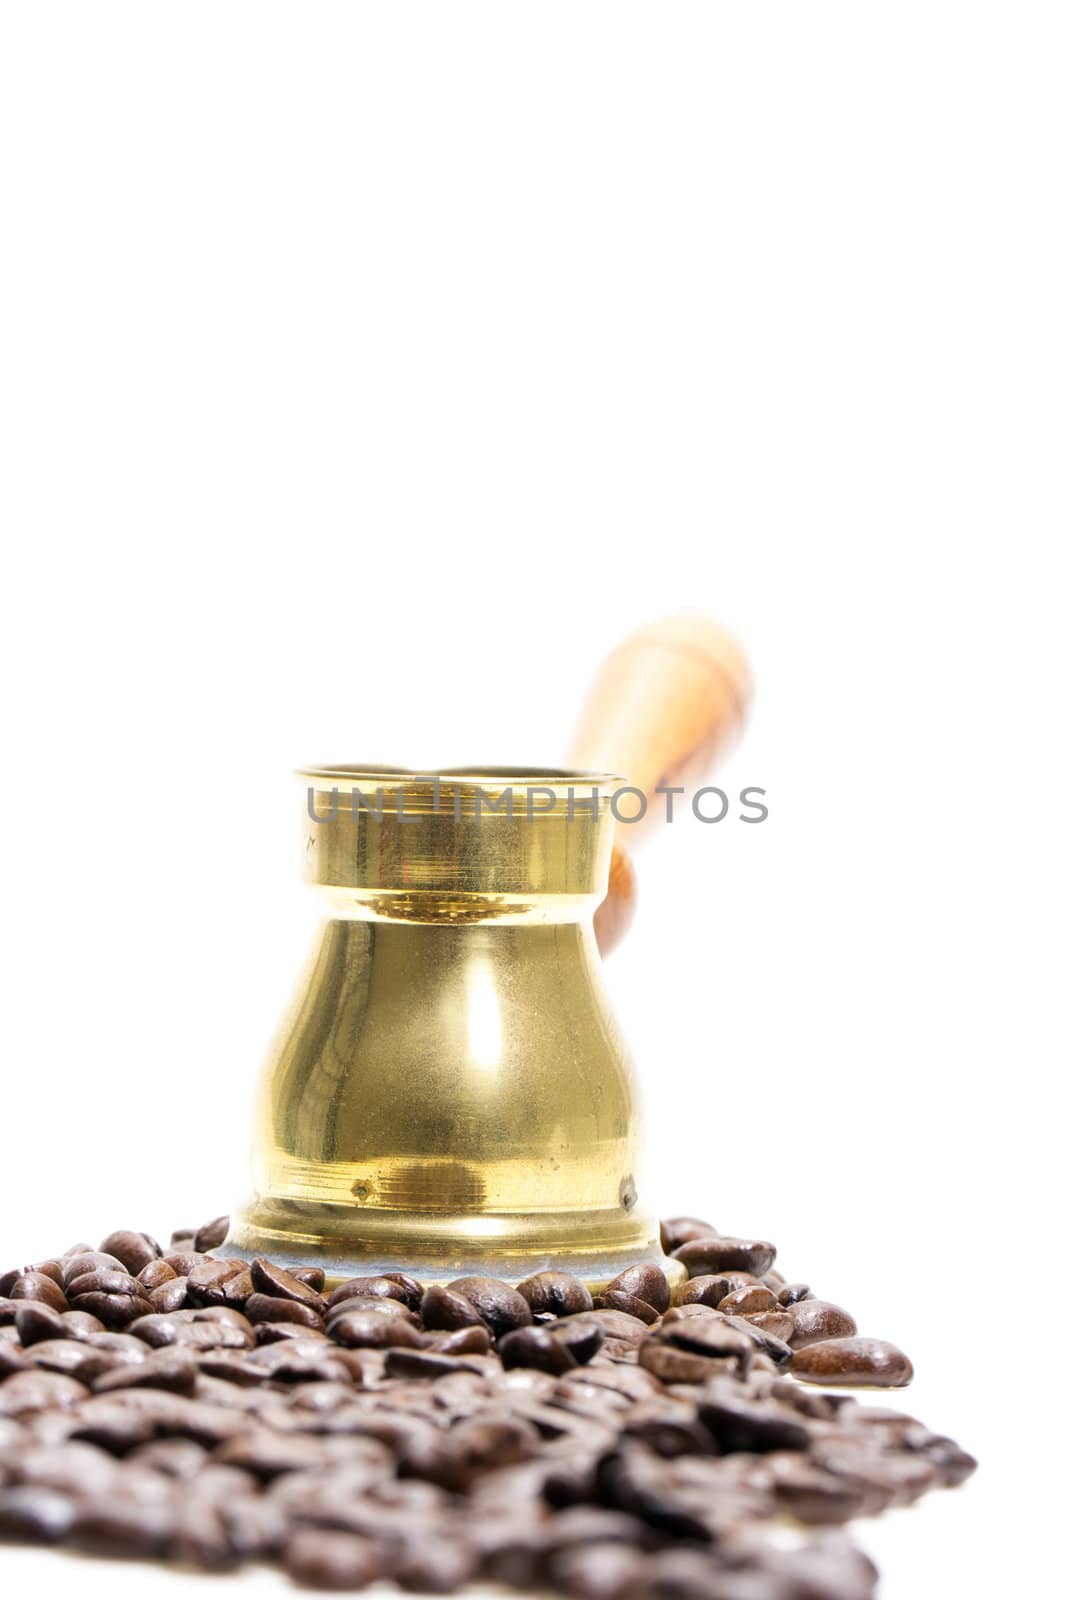 Bronze Turk (Cezve) in the midst of fresh roasted coffee beans on a white background